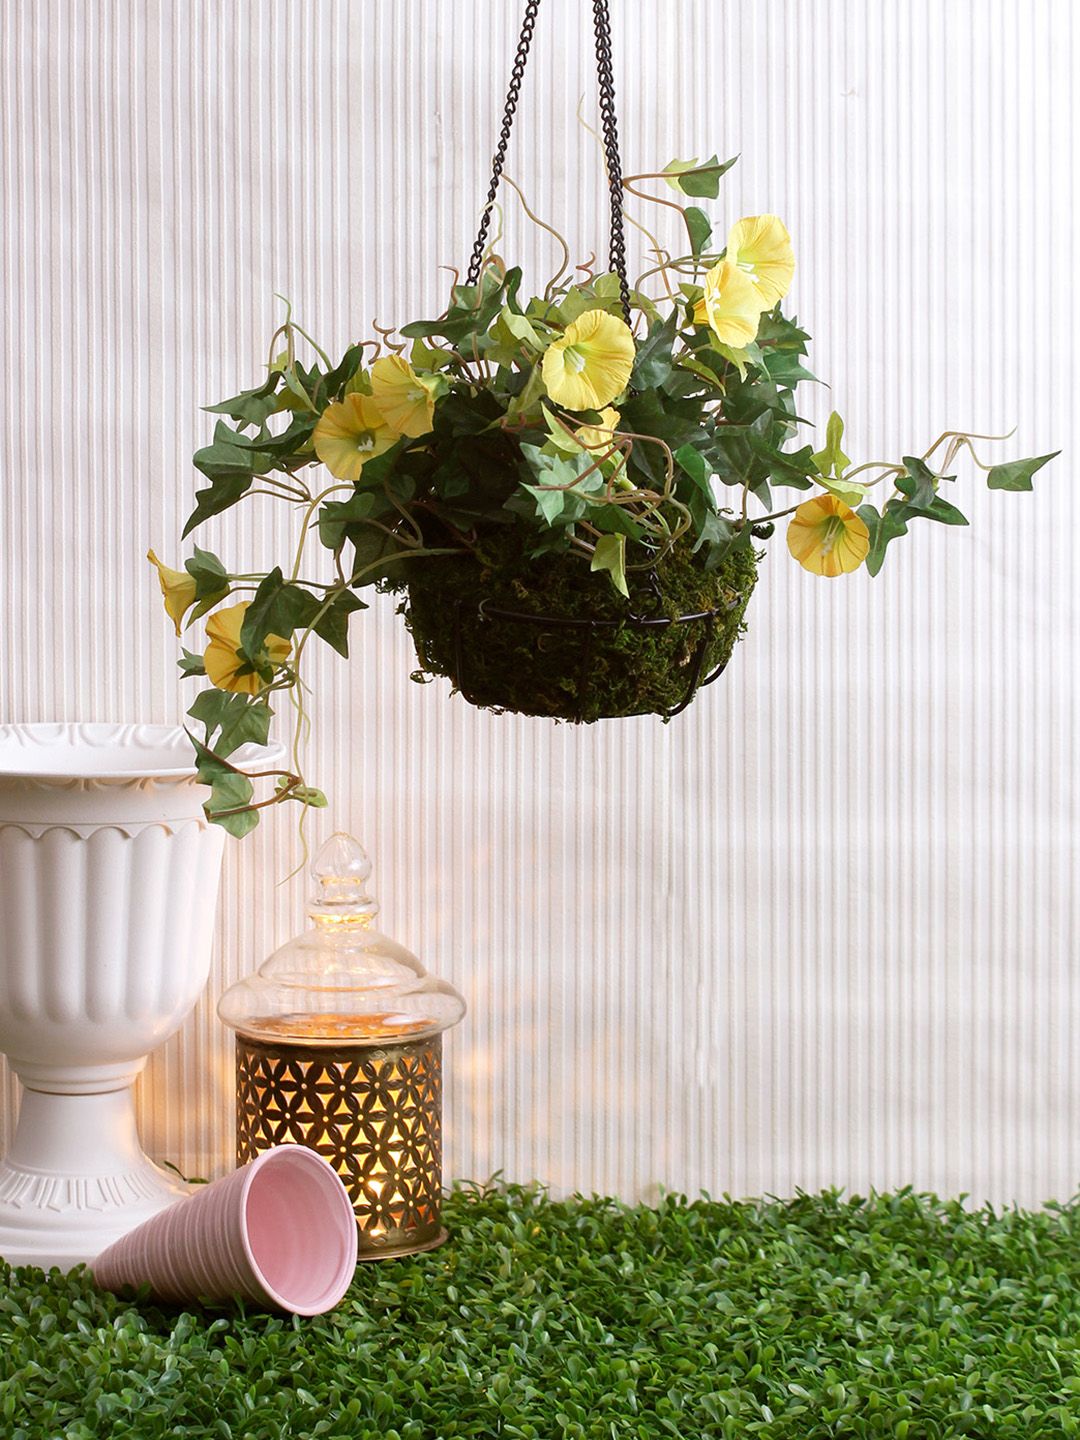 Fourwalls Yellow & Green Artificial Hanging Morning Glory Flower Plants with Basket Price in India